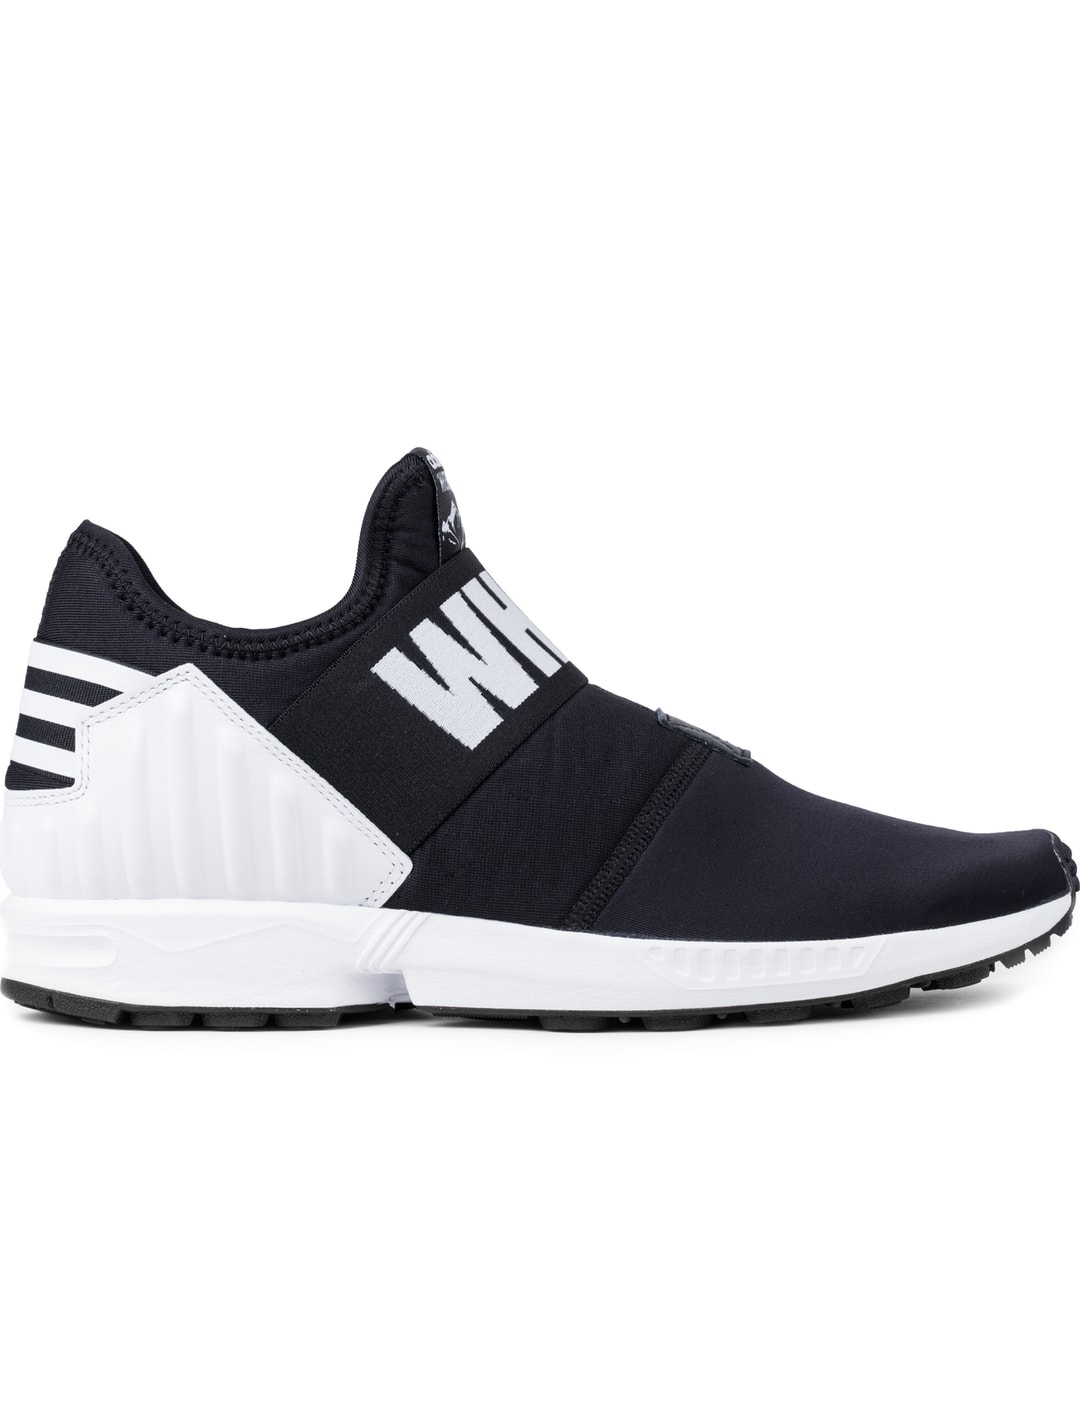 angre søskende homoseksuel White Mountaineering - WM x Adidas Originals ZX Flux Plus | HBX - Globally  Curated Fashion and Lifestyle by Hypebeast